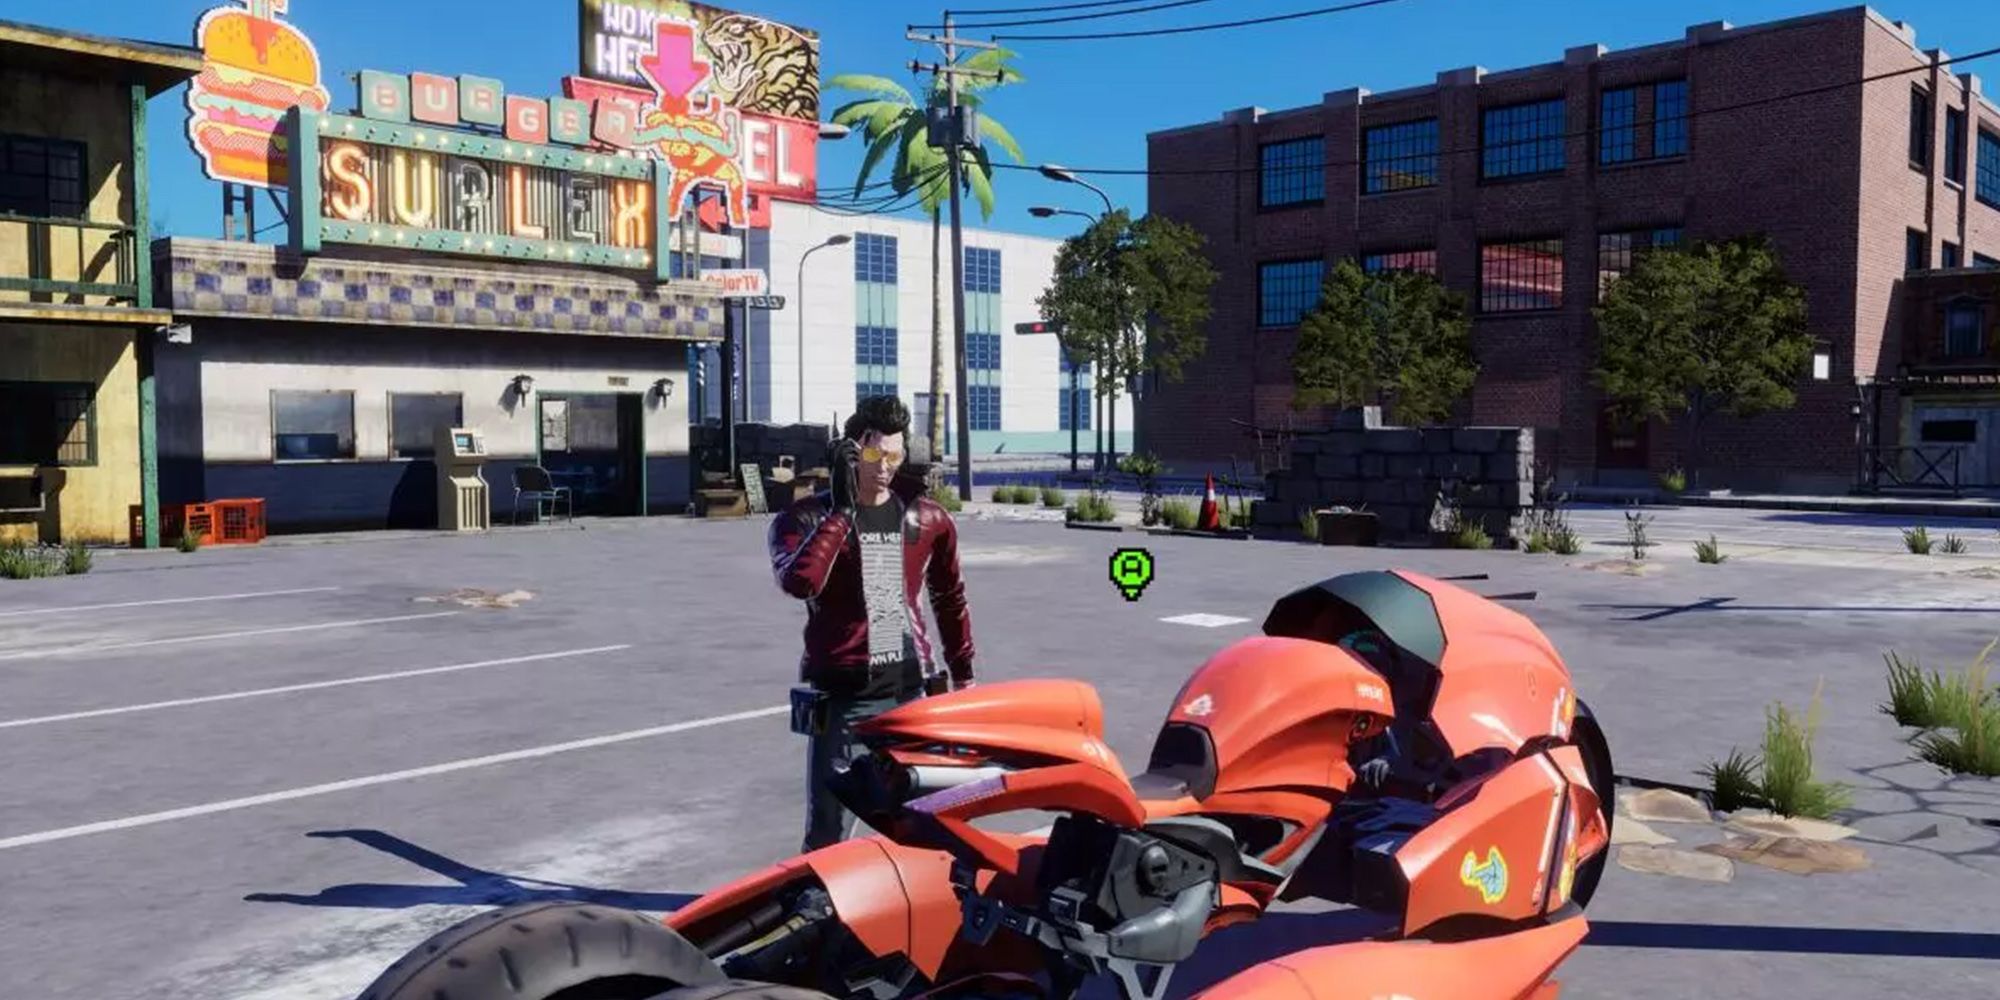 No More Heroes 3 - Travis Touchdown Talking On His Cell Before Hopping On His Motorcycle